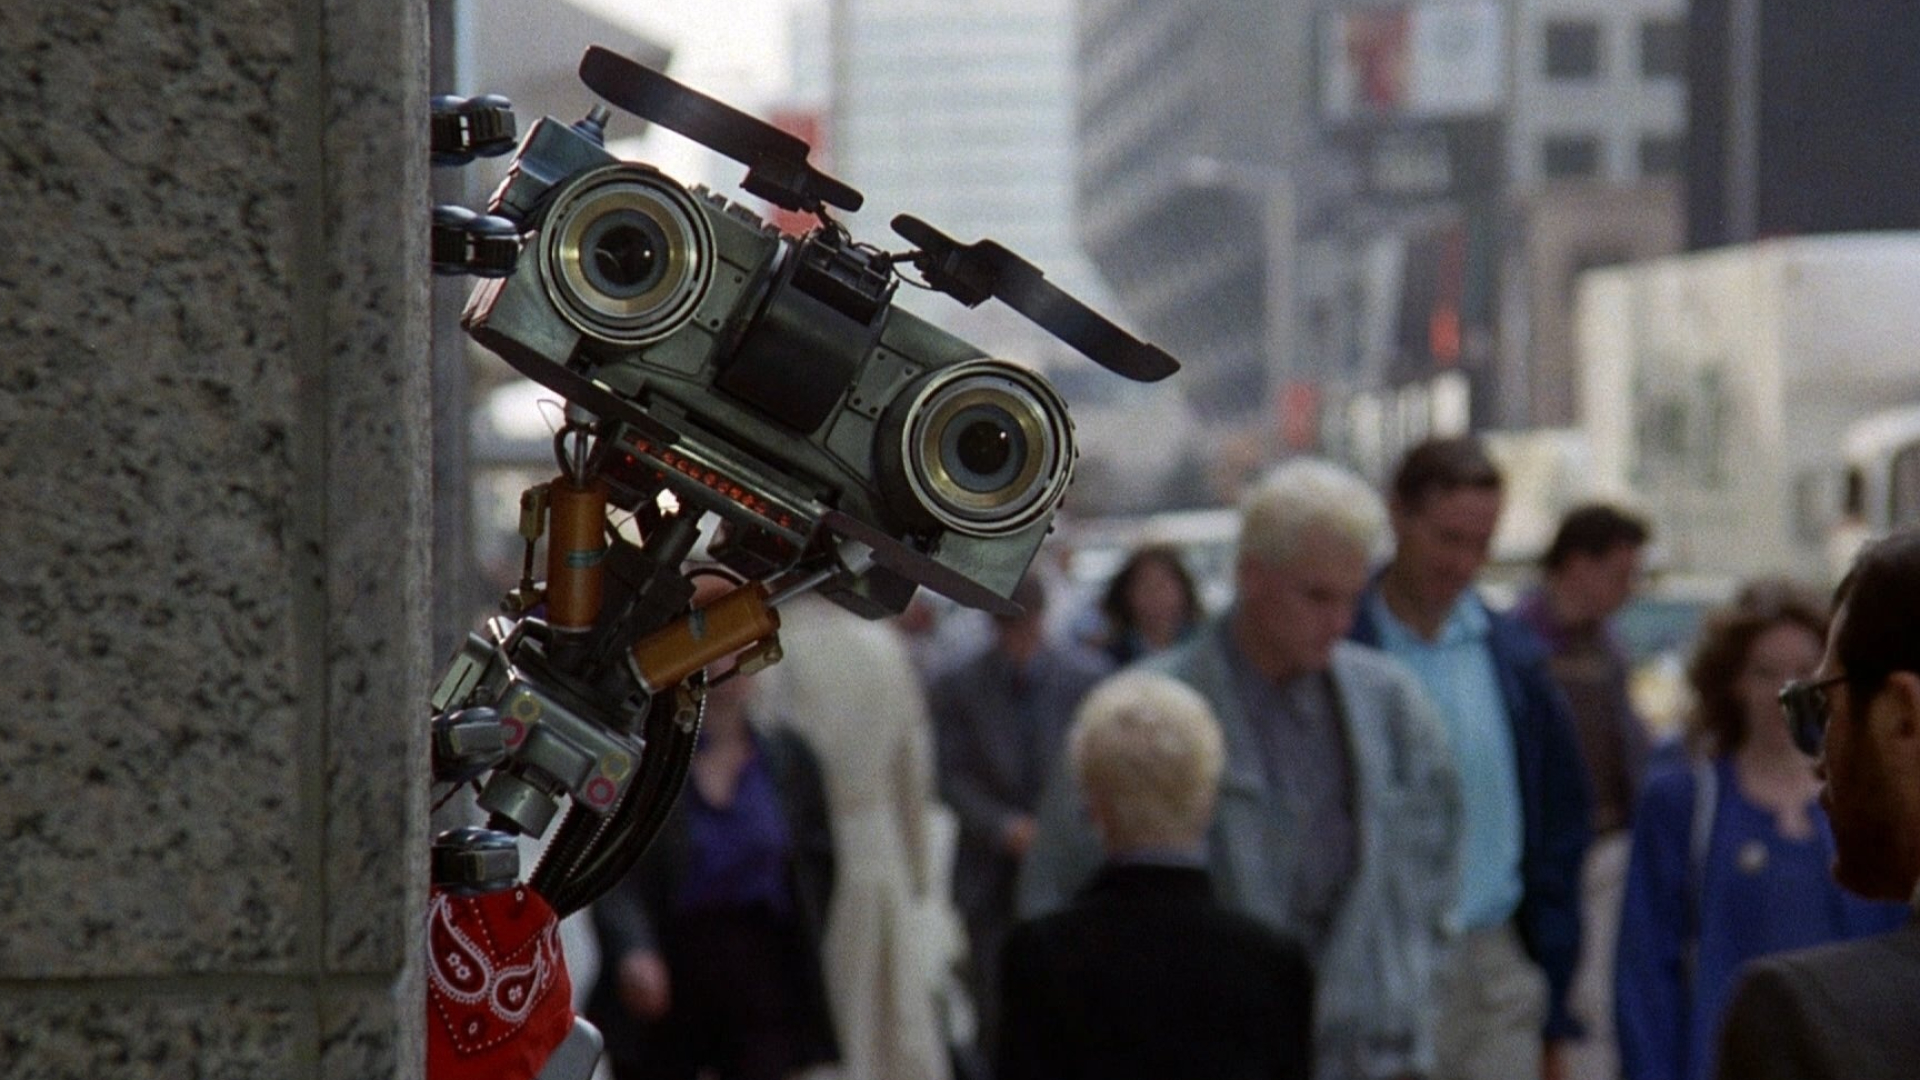 Johnny 5, Short Circuit, HD wallpapers, Background images, 1920x1080 Full HD Desktop